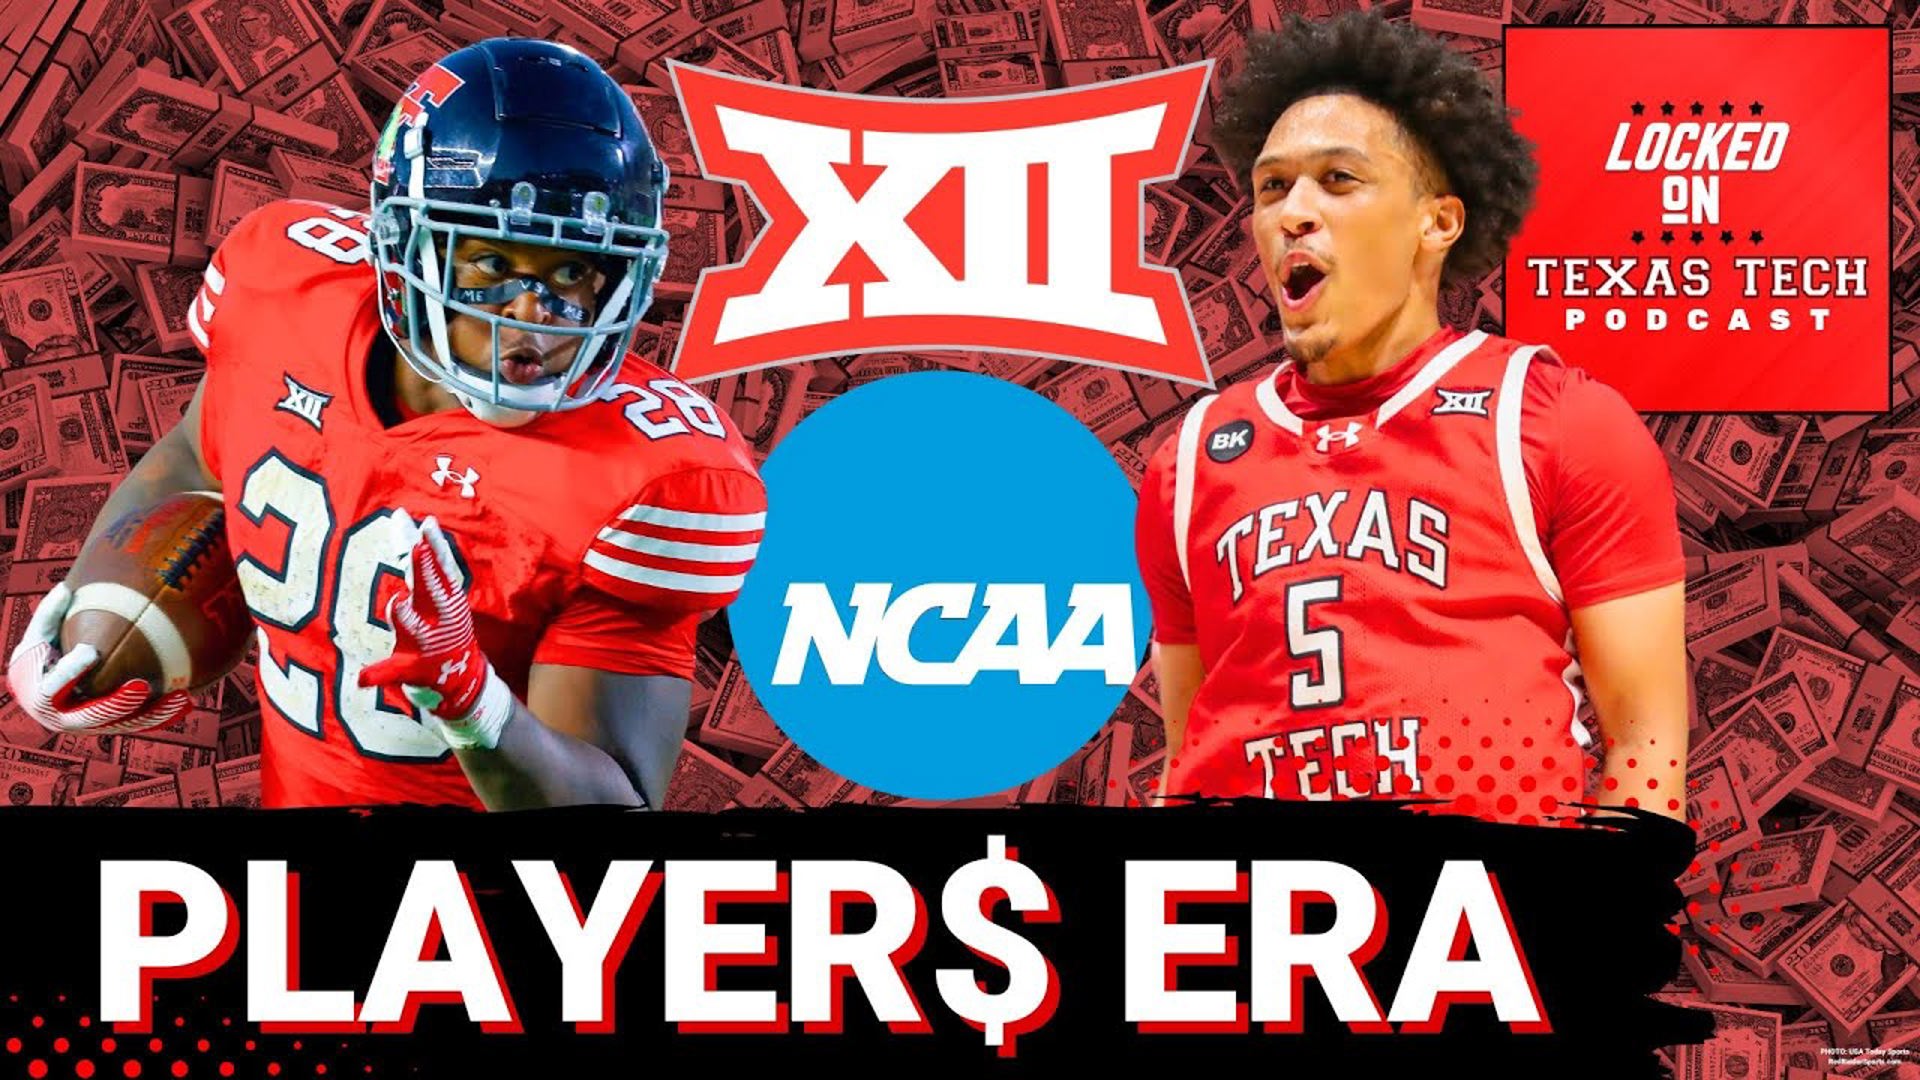 Today from Lubbock, TX, on Locked On Texas Tech:

- expanded Big 12 schedule
- Player$ Era Fe$tival
- Thanksgiving plans in flux?